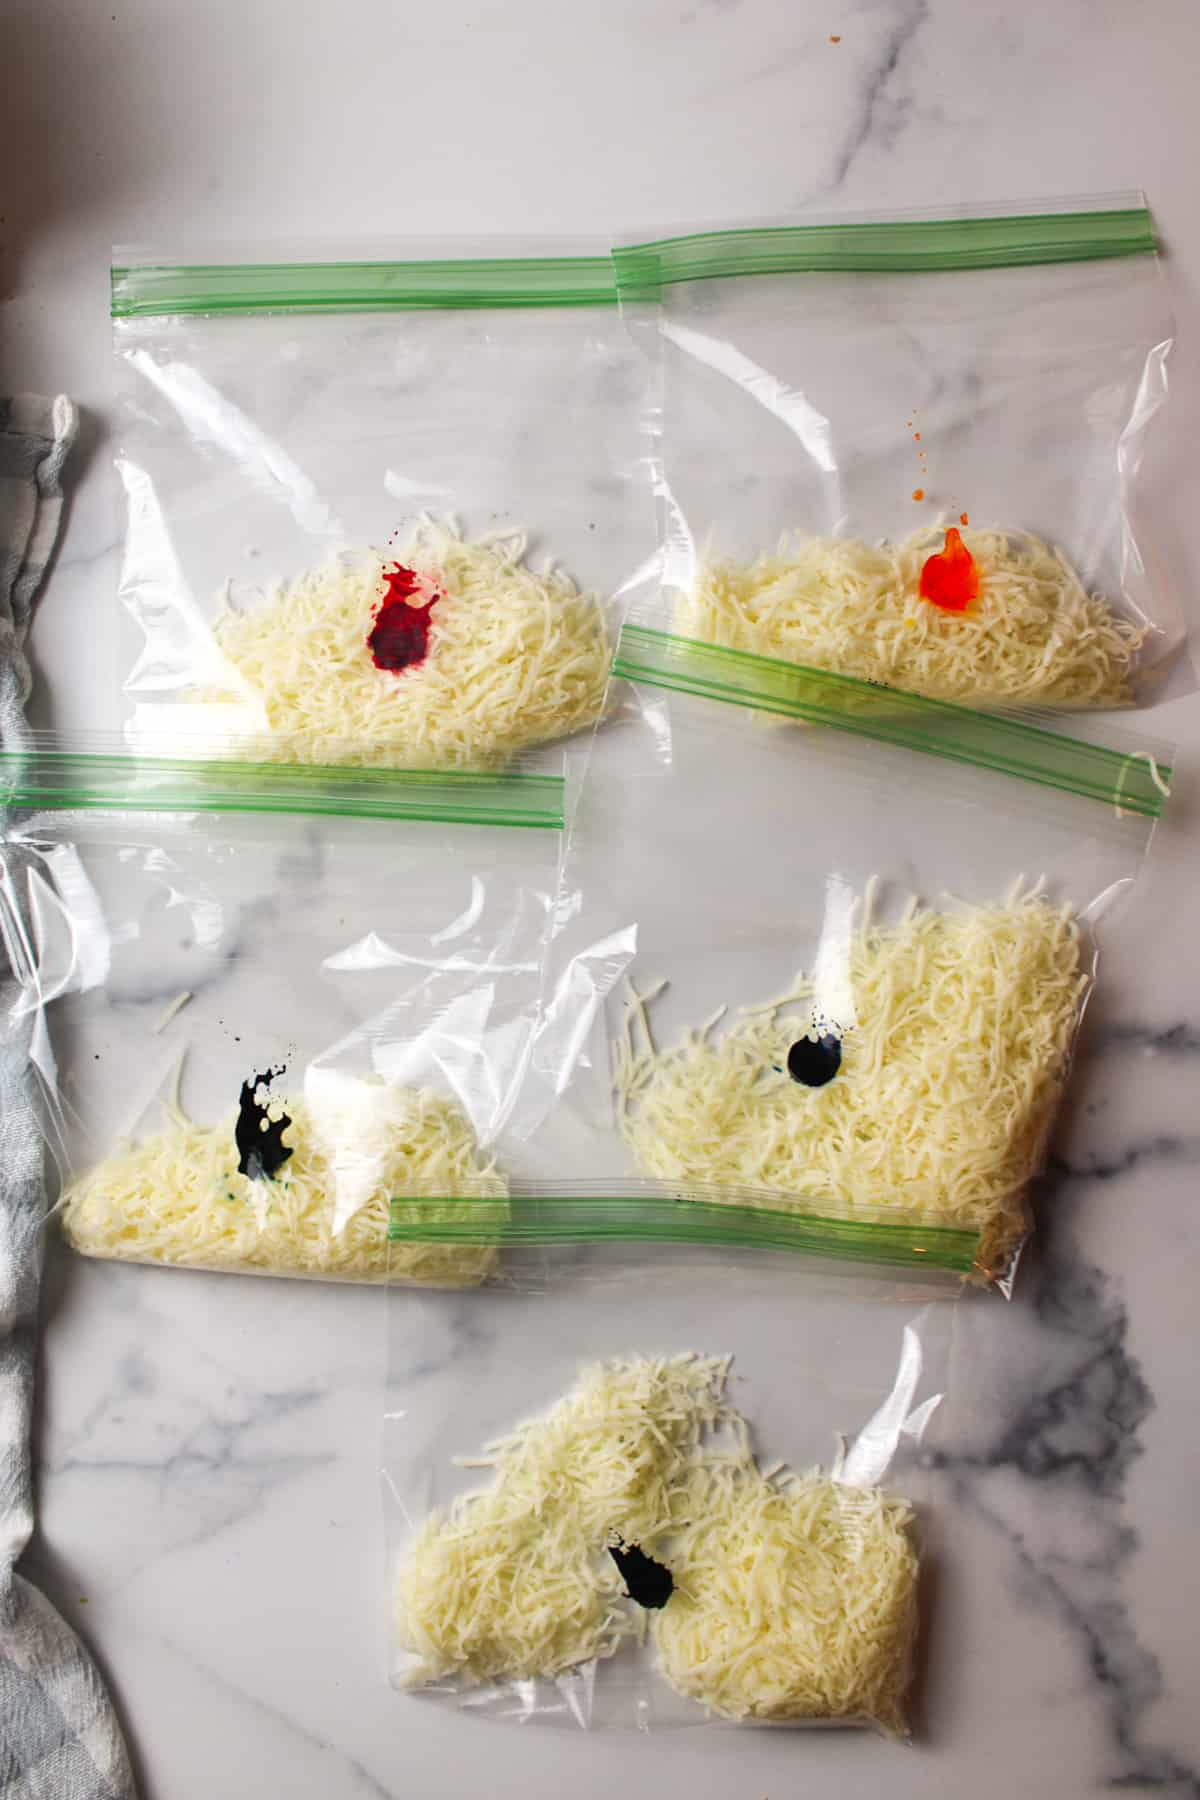 divided white shredded cheese in bags with dots of food coloring in each.